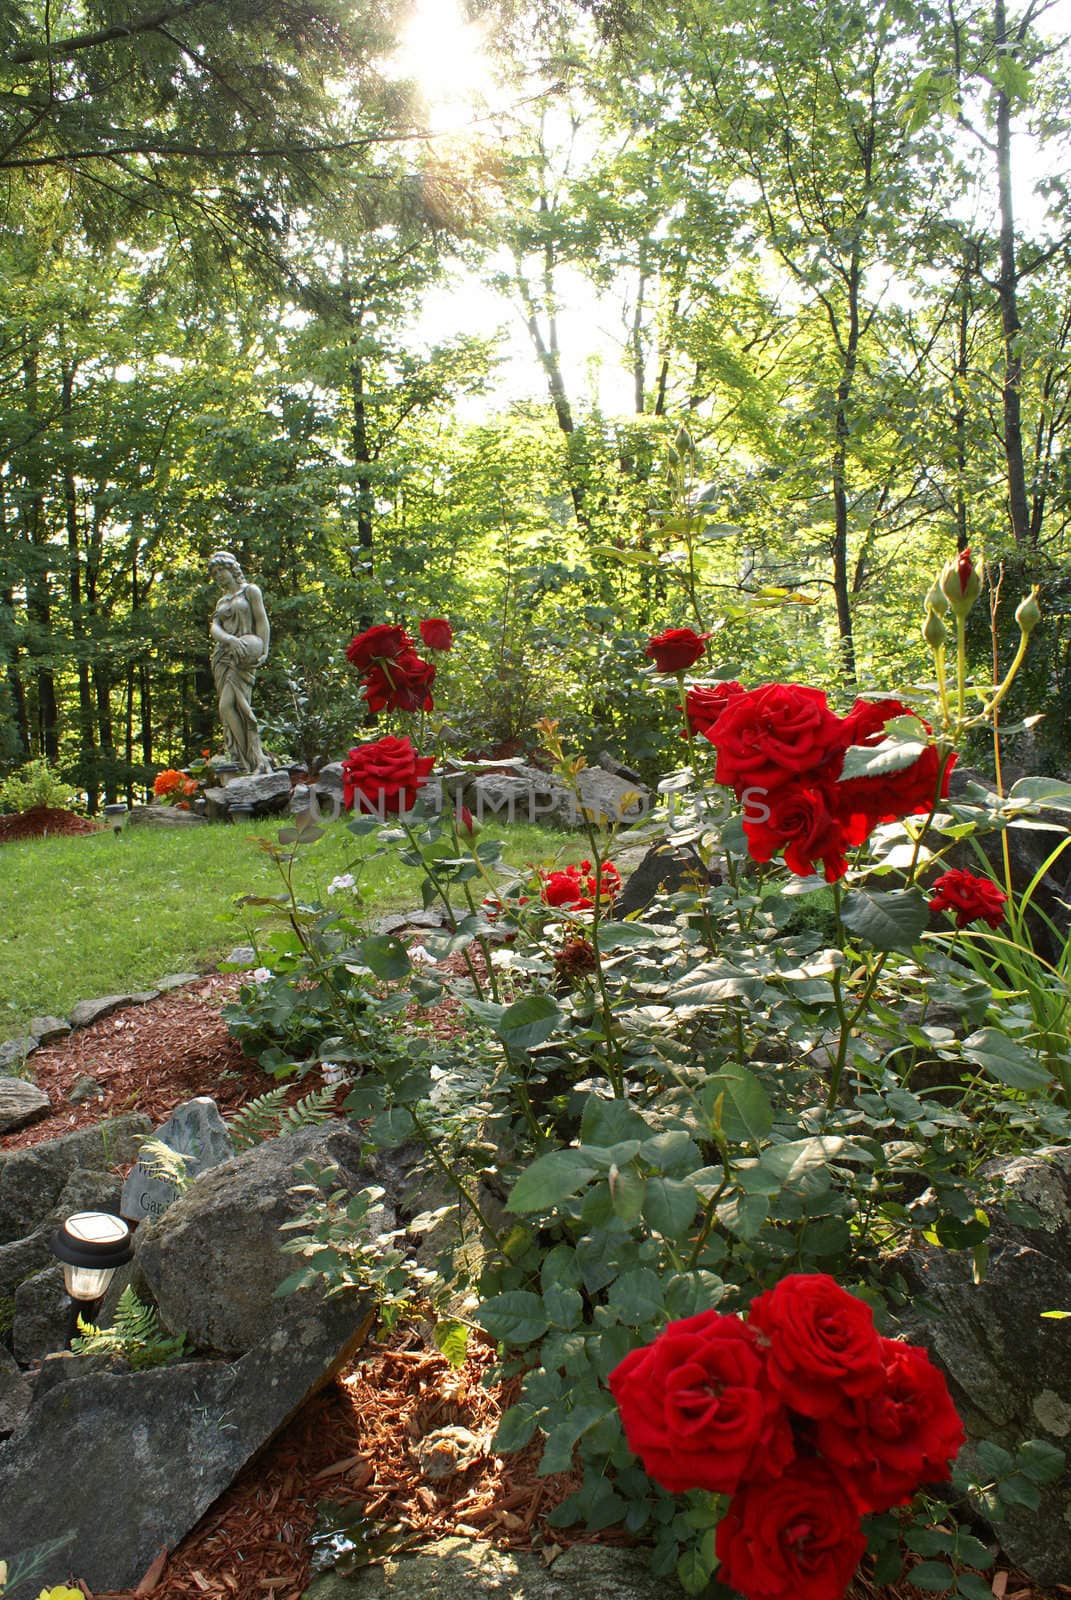 A beautfil garden with a rose bush in the front and a statue in the background.